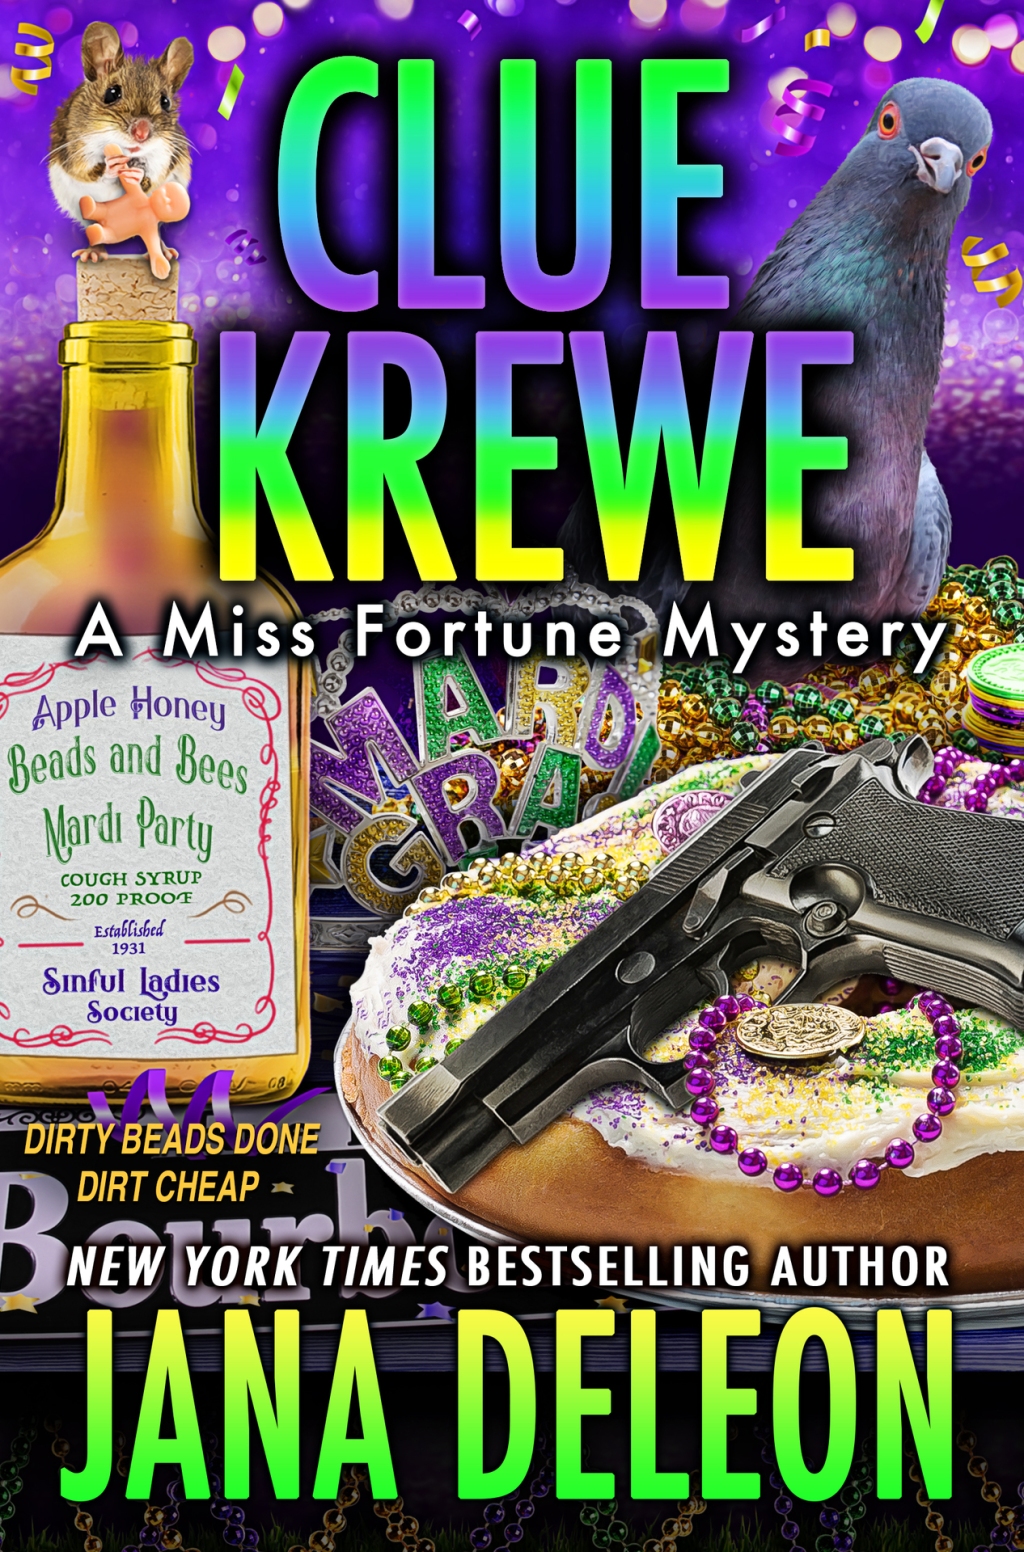 Clue Krewe – Another good one.